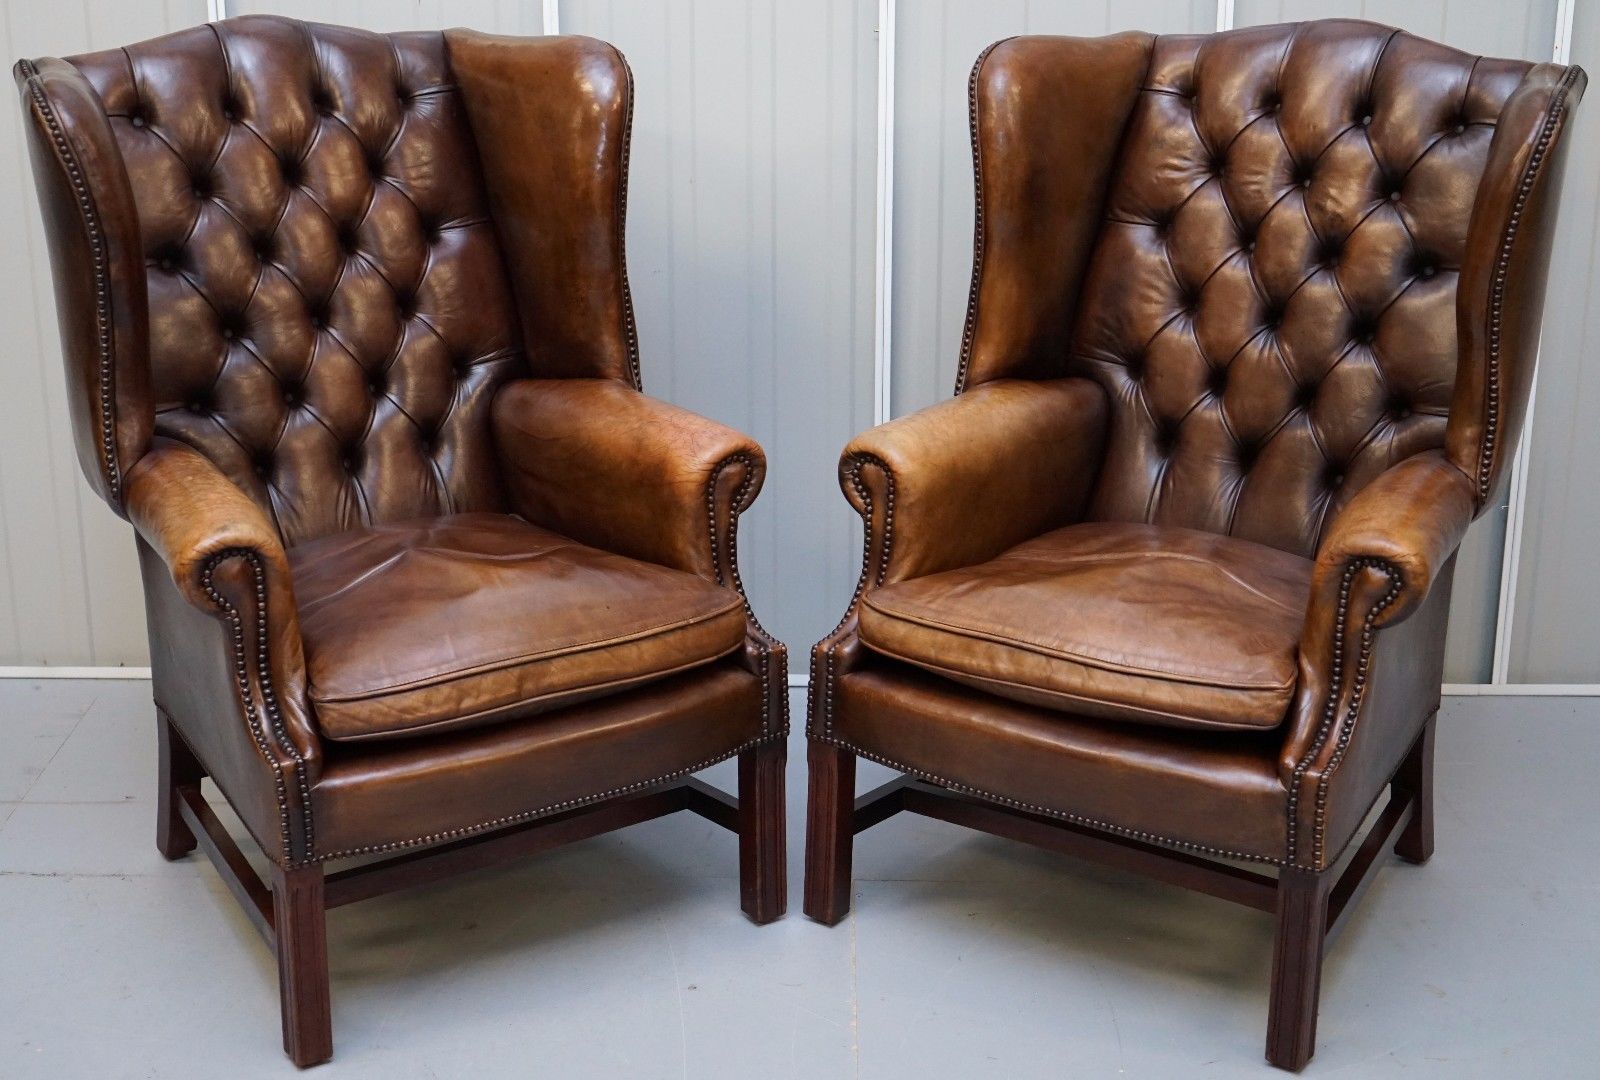 PAIR OF CHESTERFIELD VINTAGE BROWN LEATHER GEORGIAN STYLE WINGBACK ARMCHAIRS